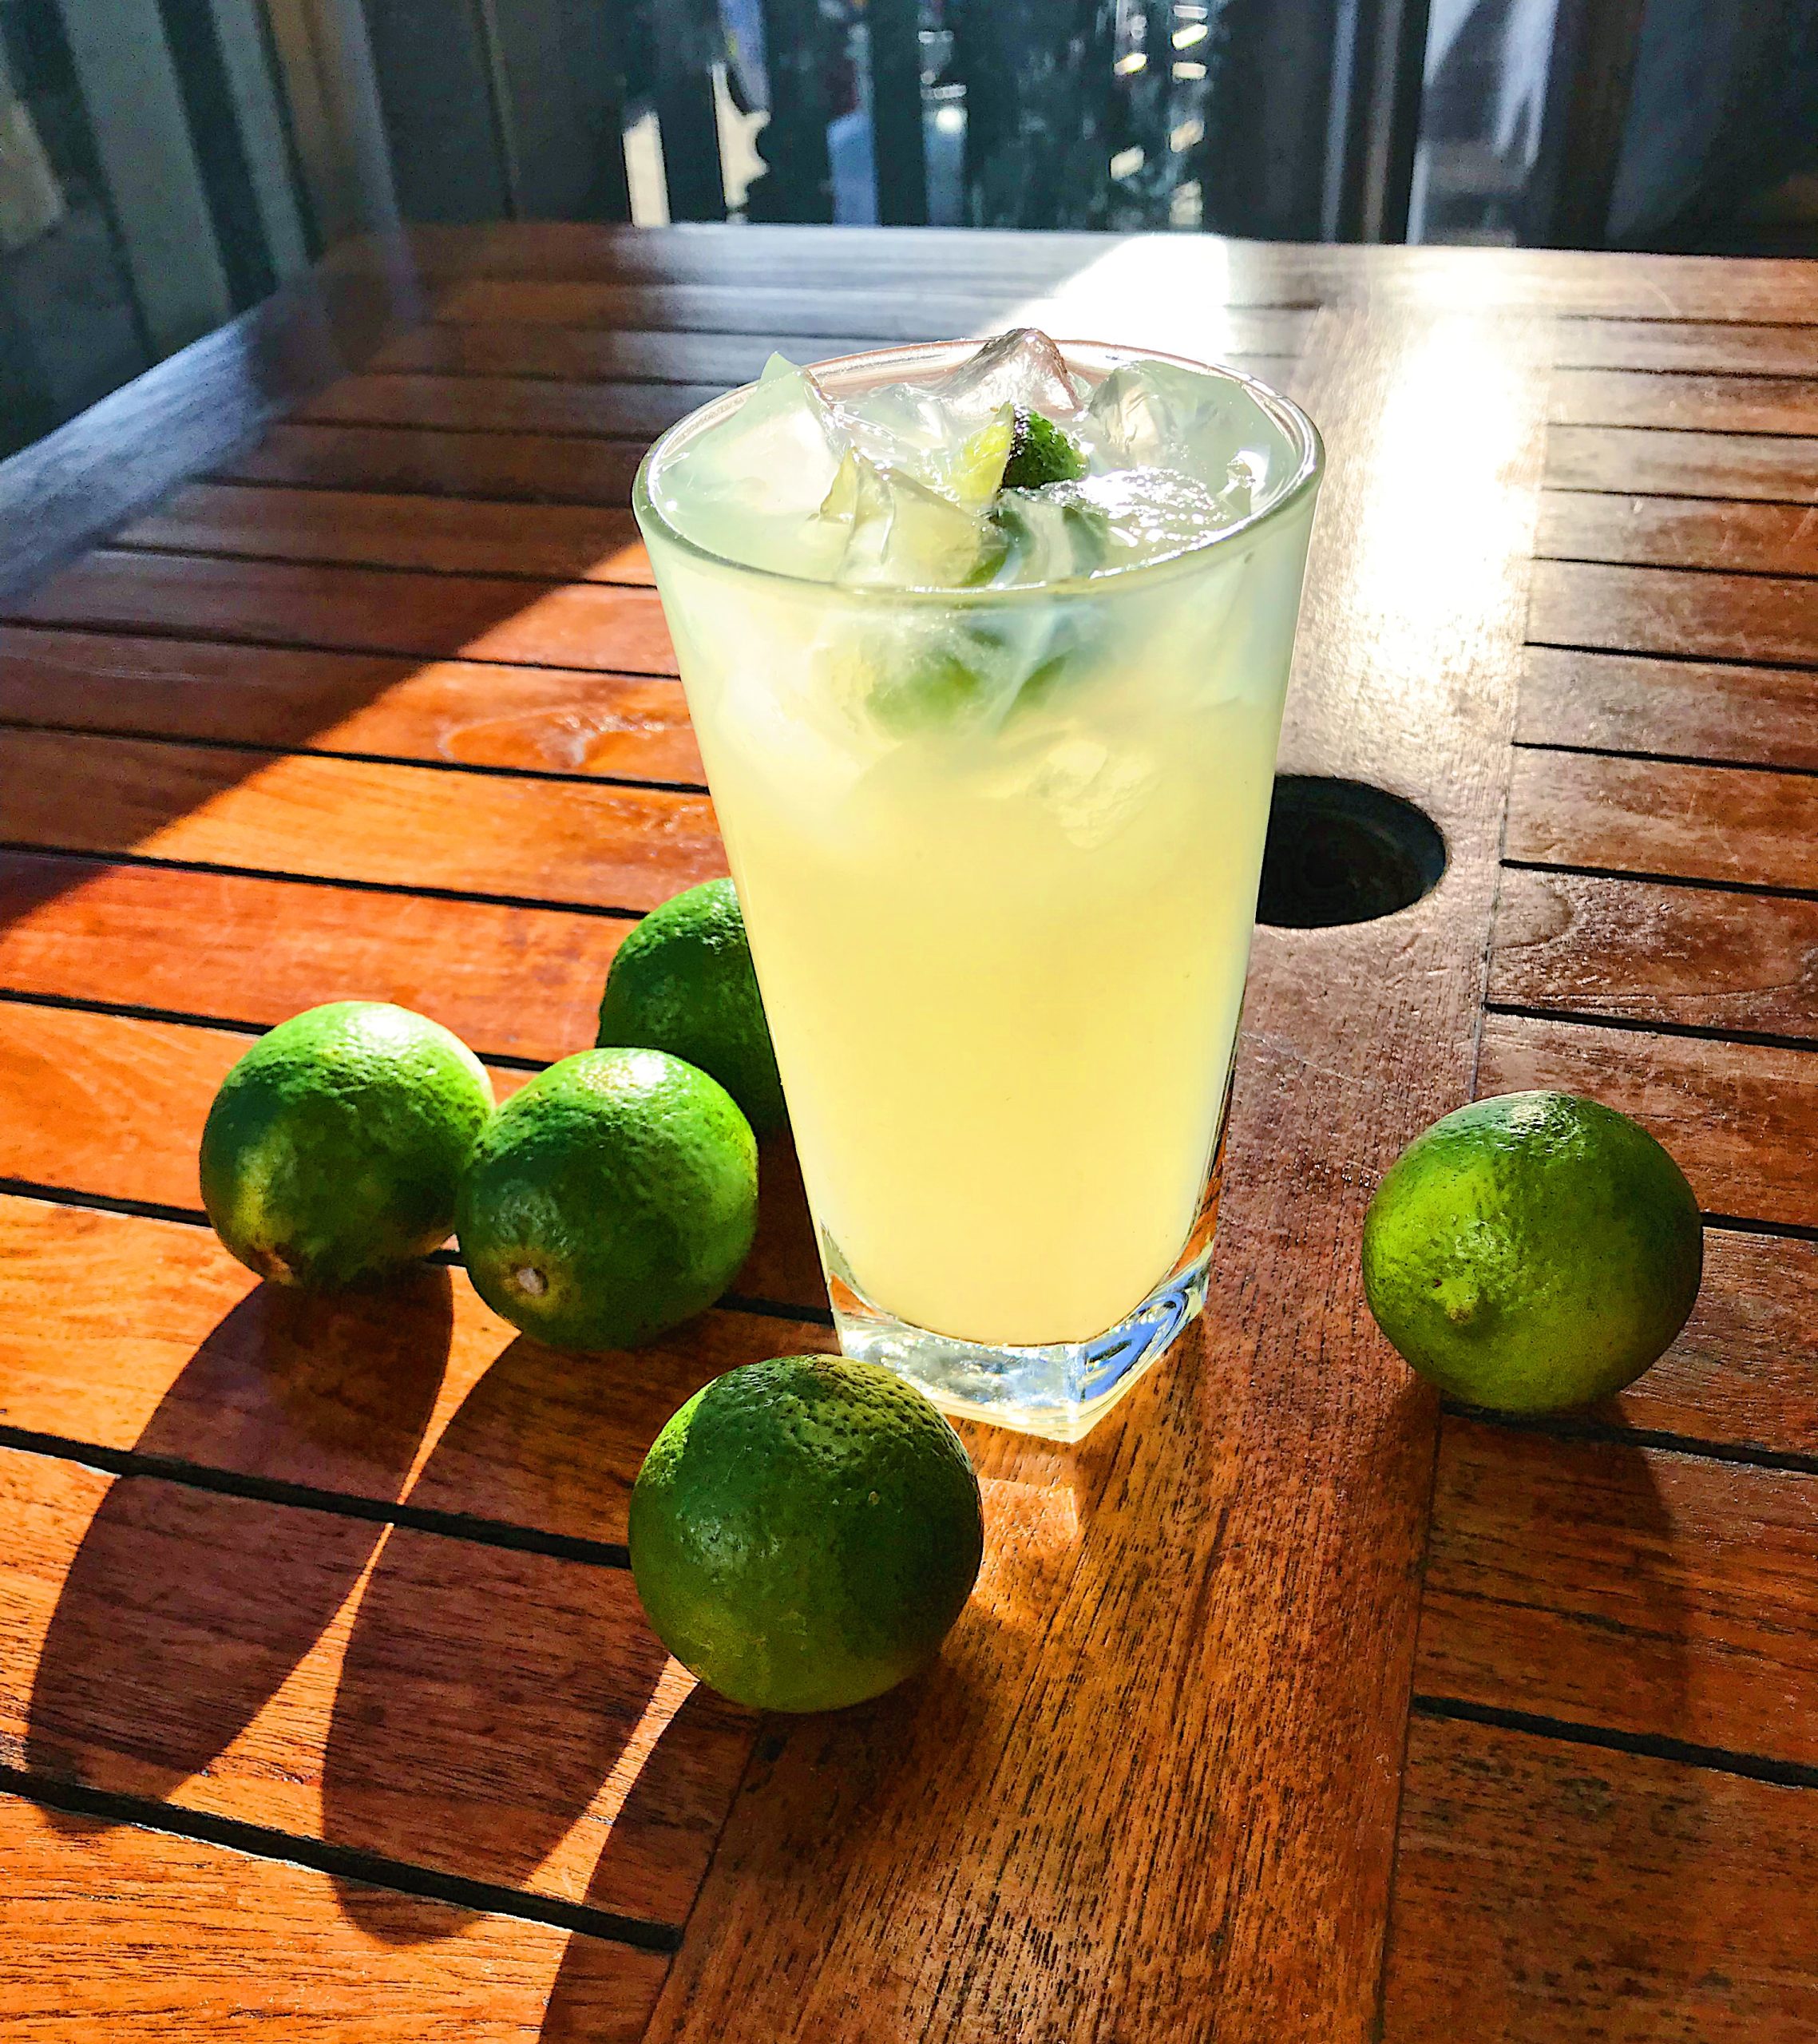 Limeade: The Roadhouse has a New Squeeze